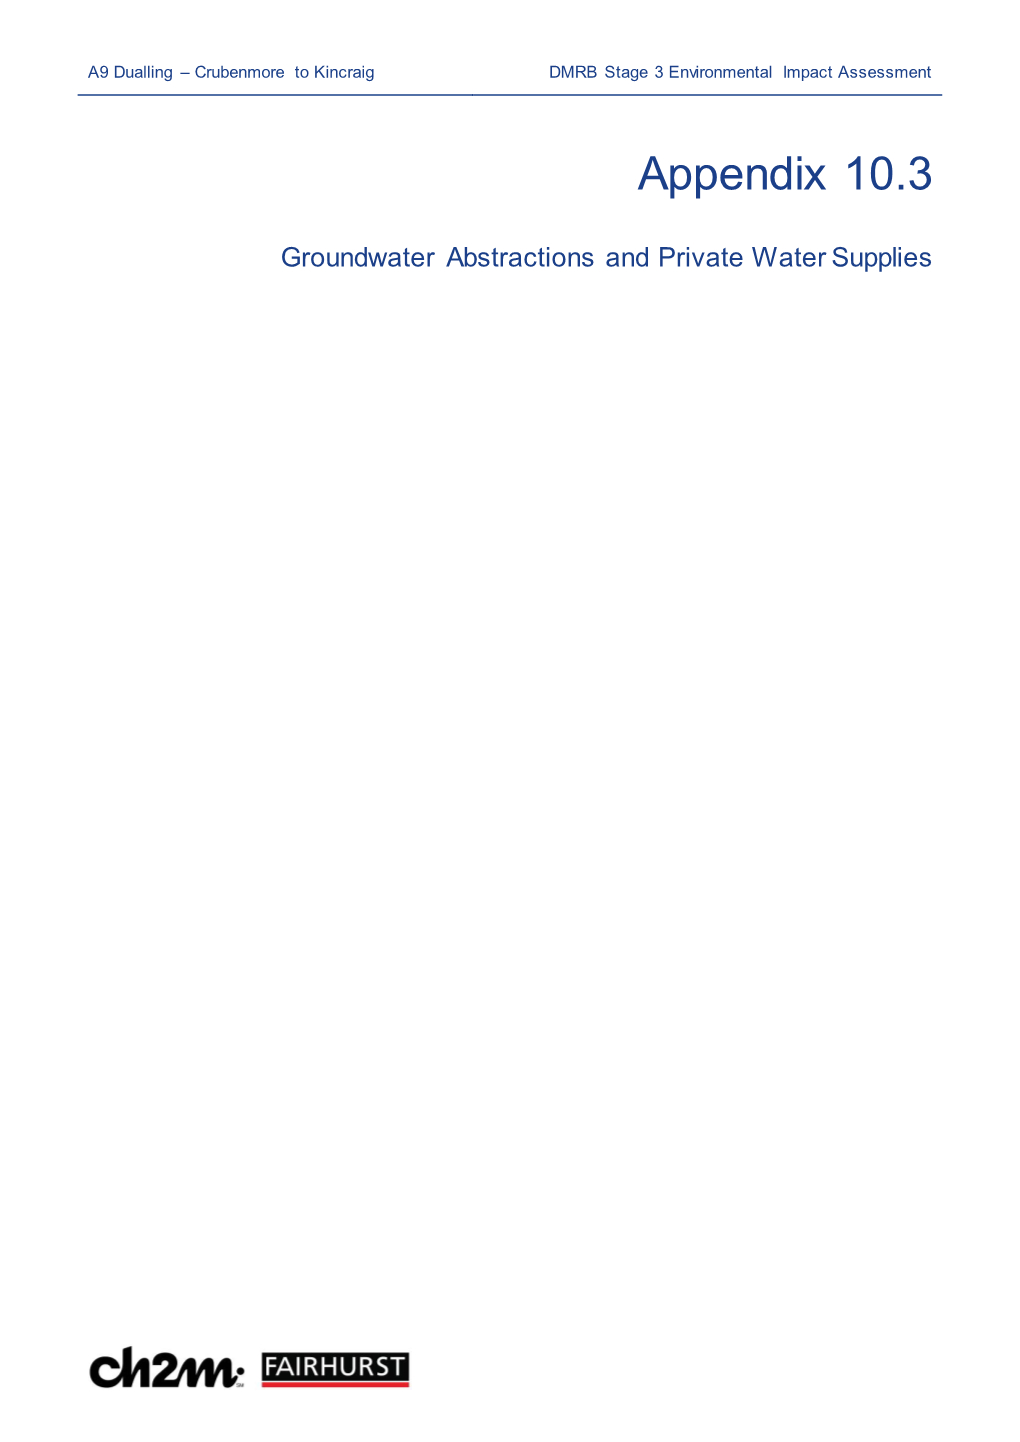 Groundwater Abstractions and Private Water Supplies